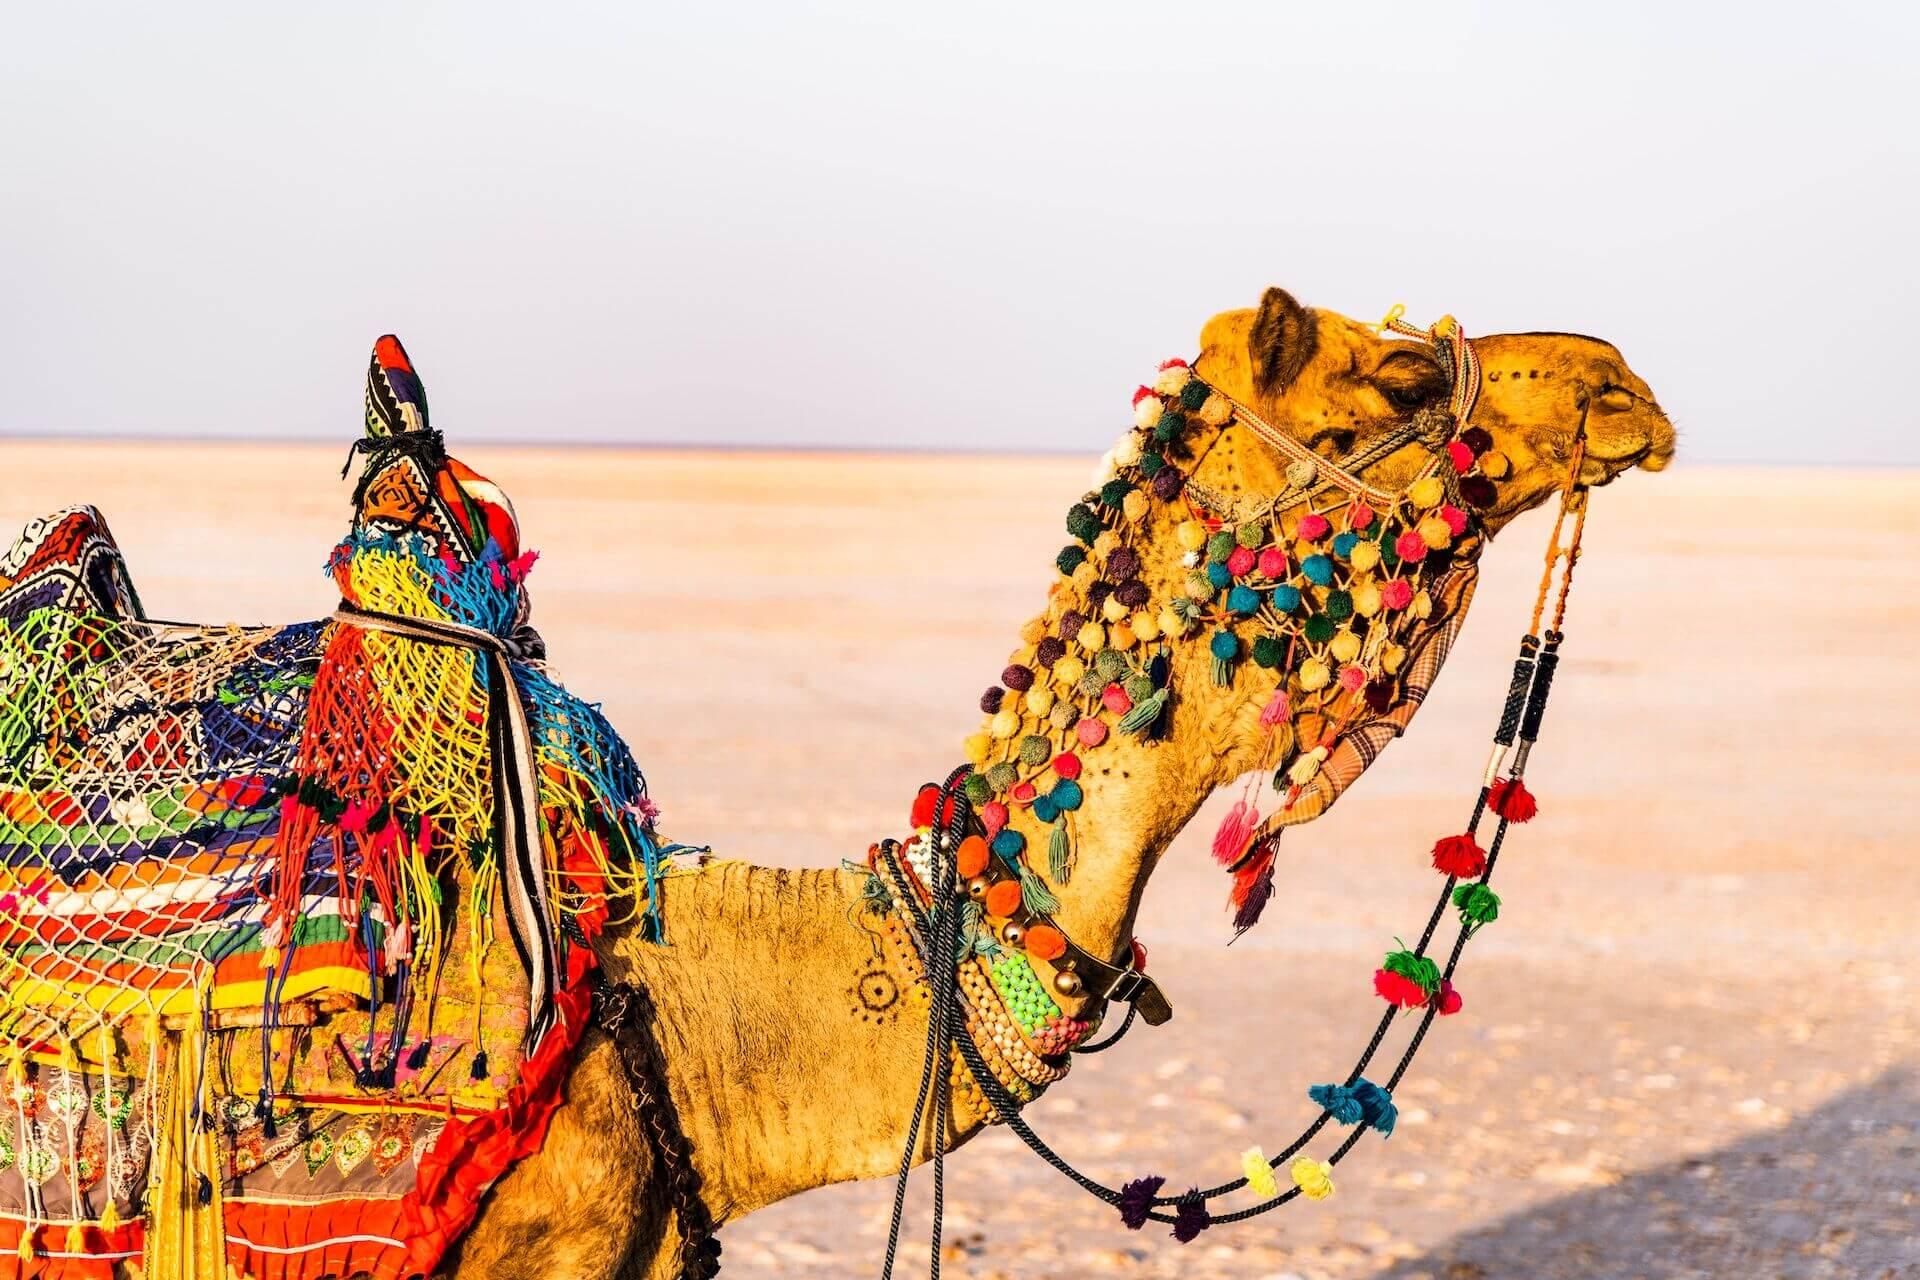 A camel adorned with colorful accessories